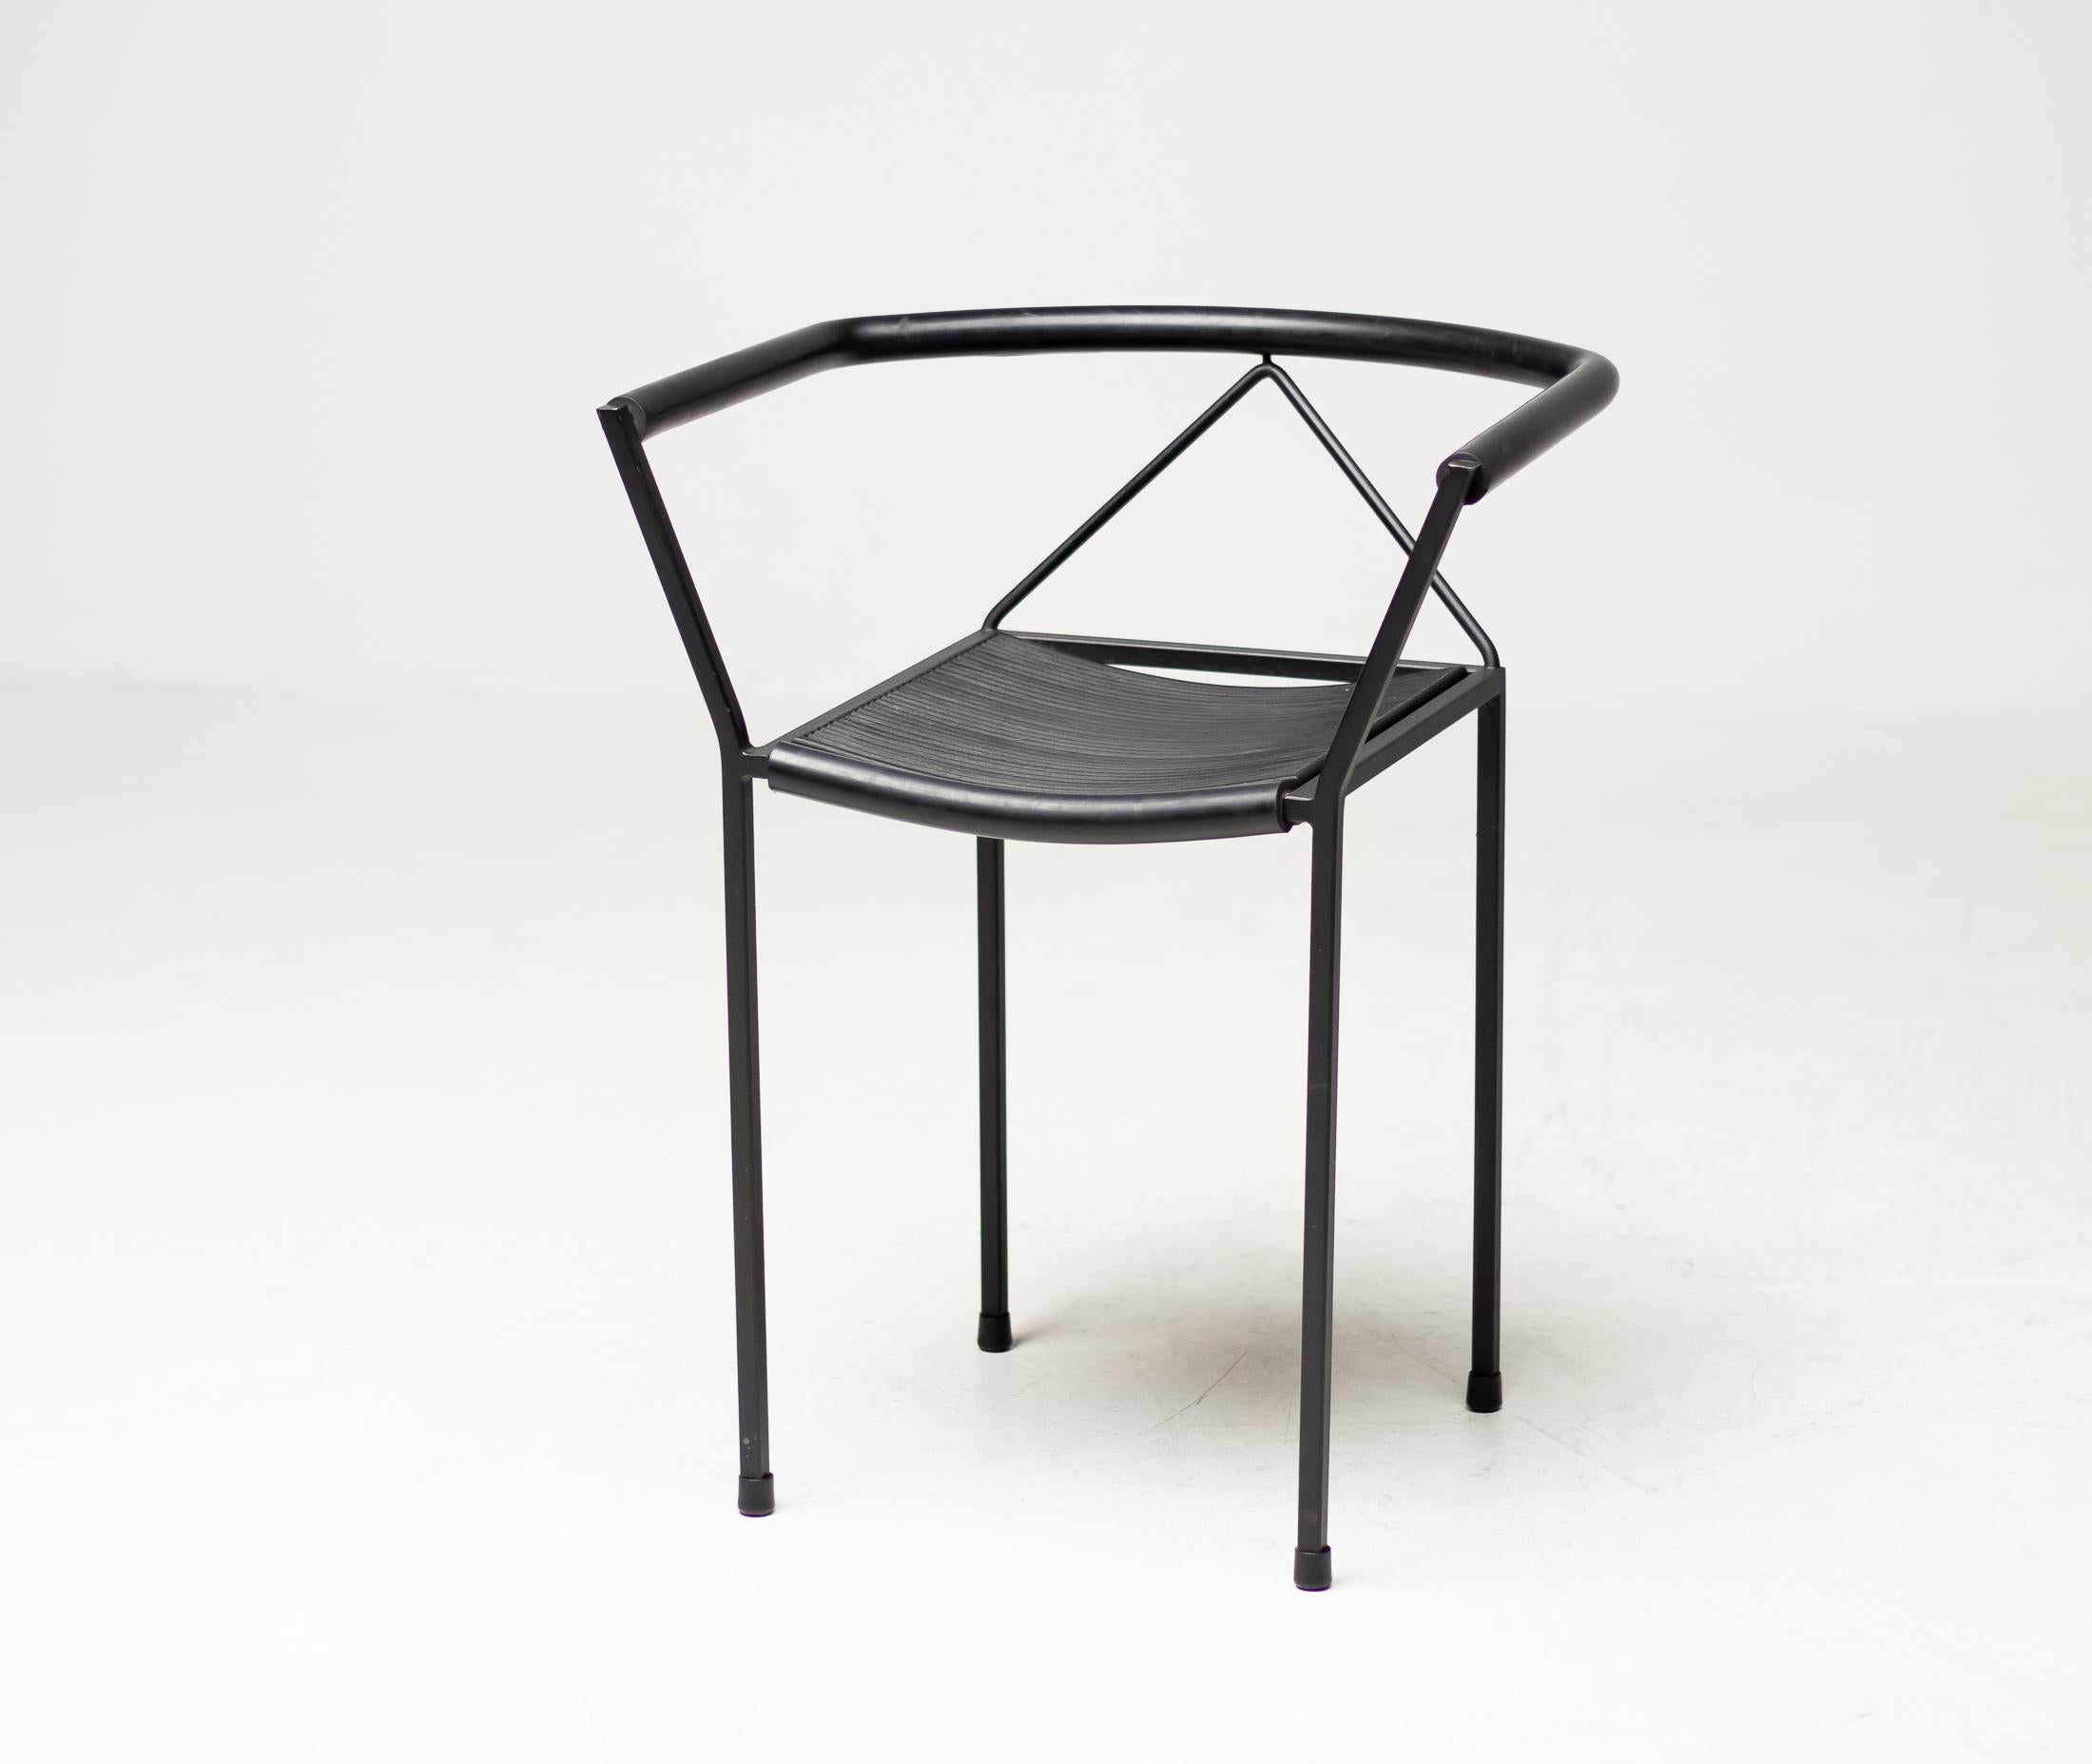 Elegant Italian chairs designed by Maurizio Peregalli for Noto Zeus, Milano in 1984.
Square powder-coated steel tube, seat and backrest molded Polyurethane.
Marked.